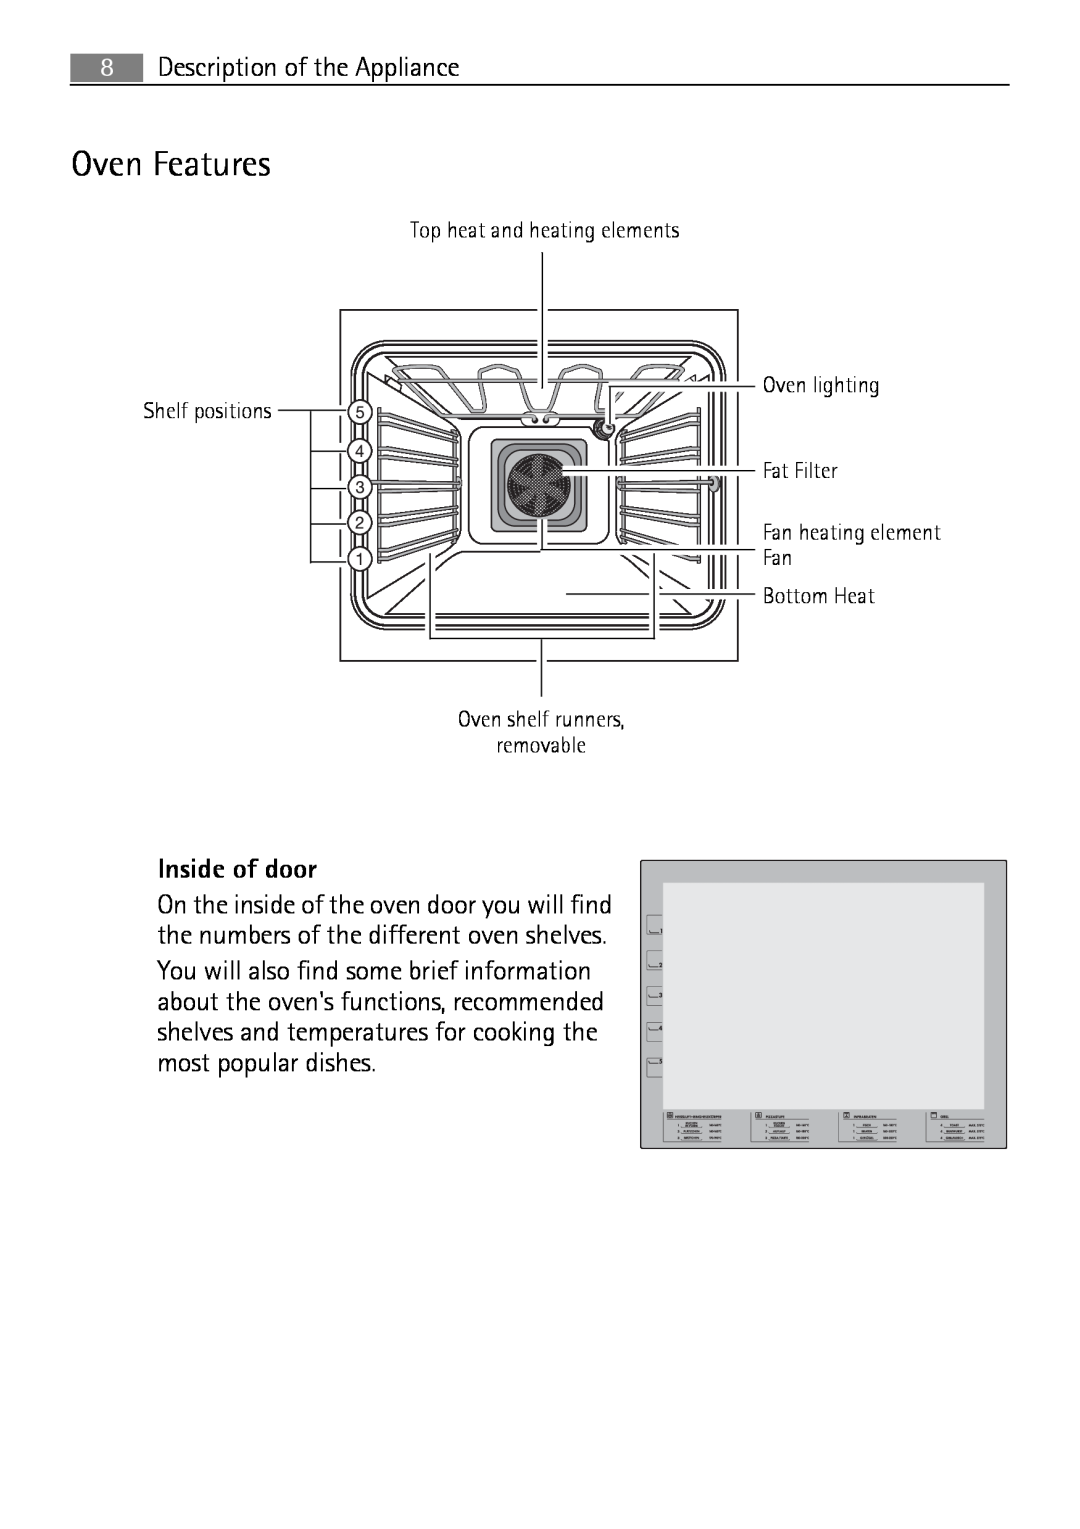 Electrolux E43012-5 user manual Oven Features, Inside of door 